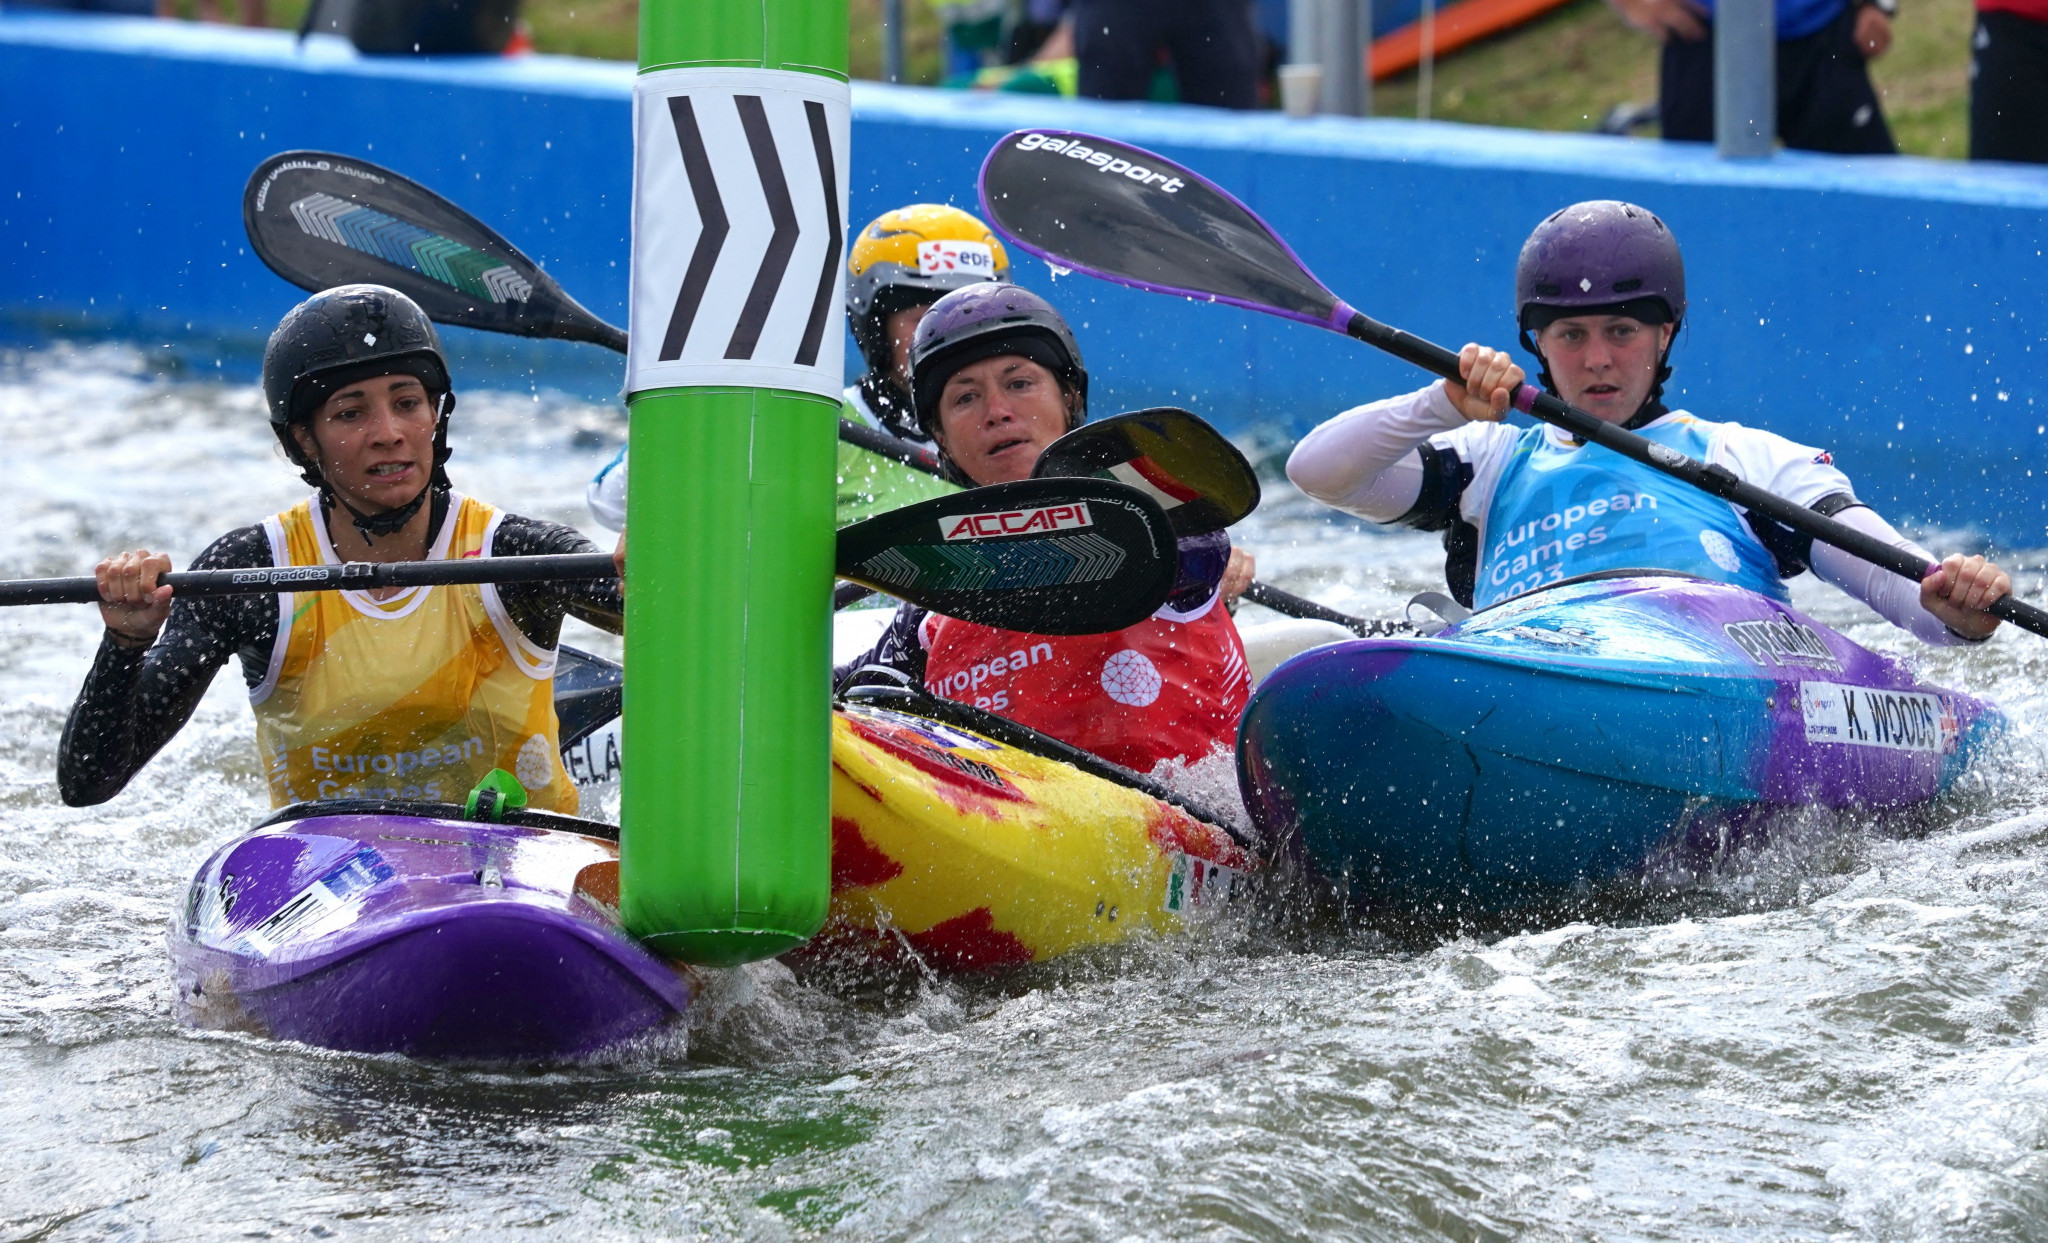 ICF President claims kayak cross can put slalom on "new level" at Paris 2024